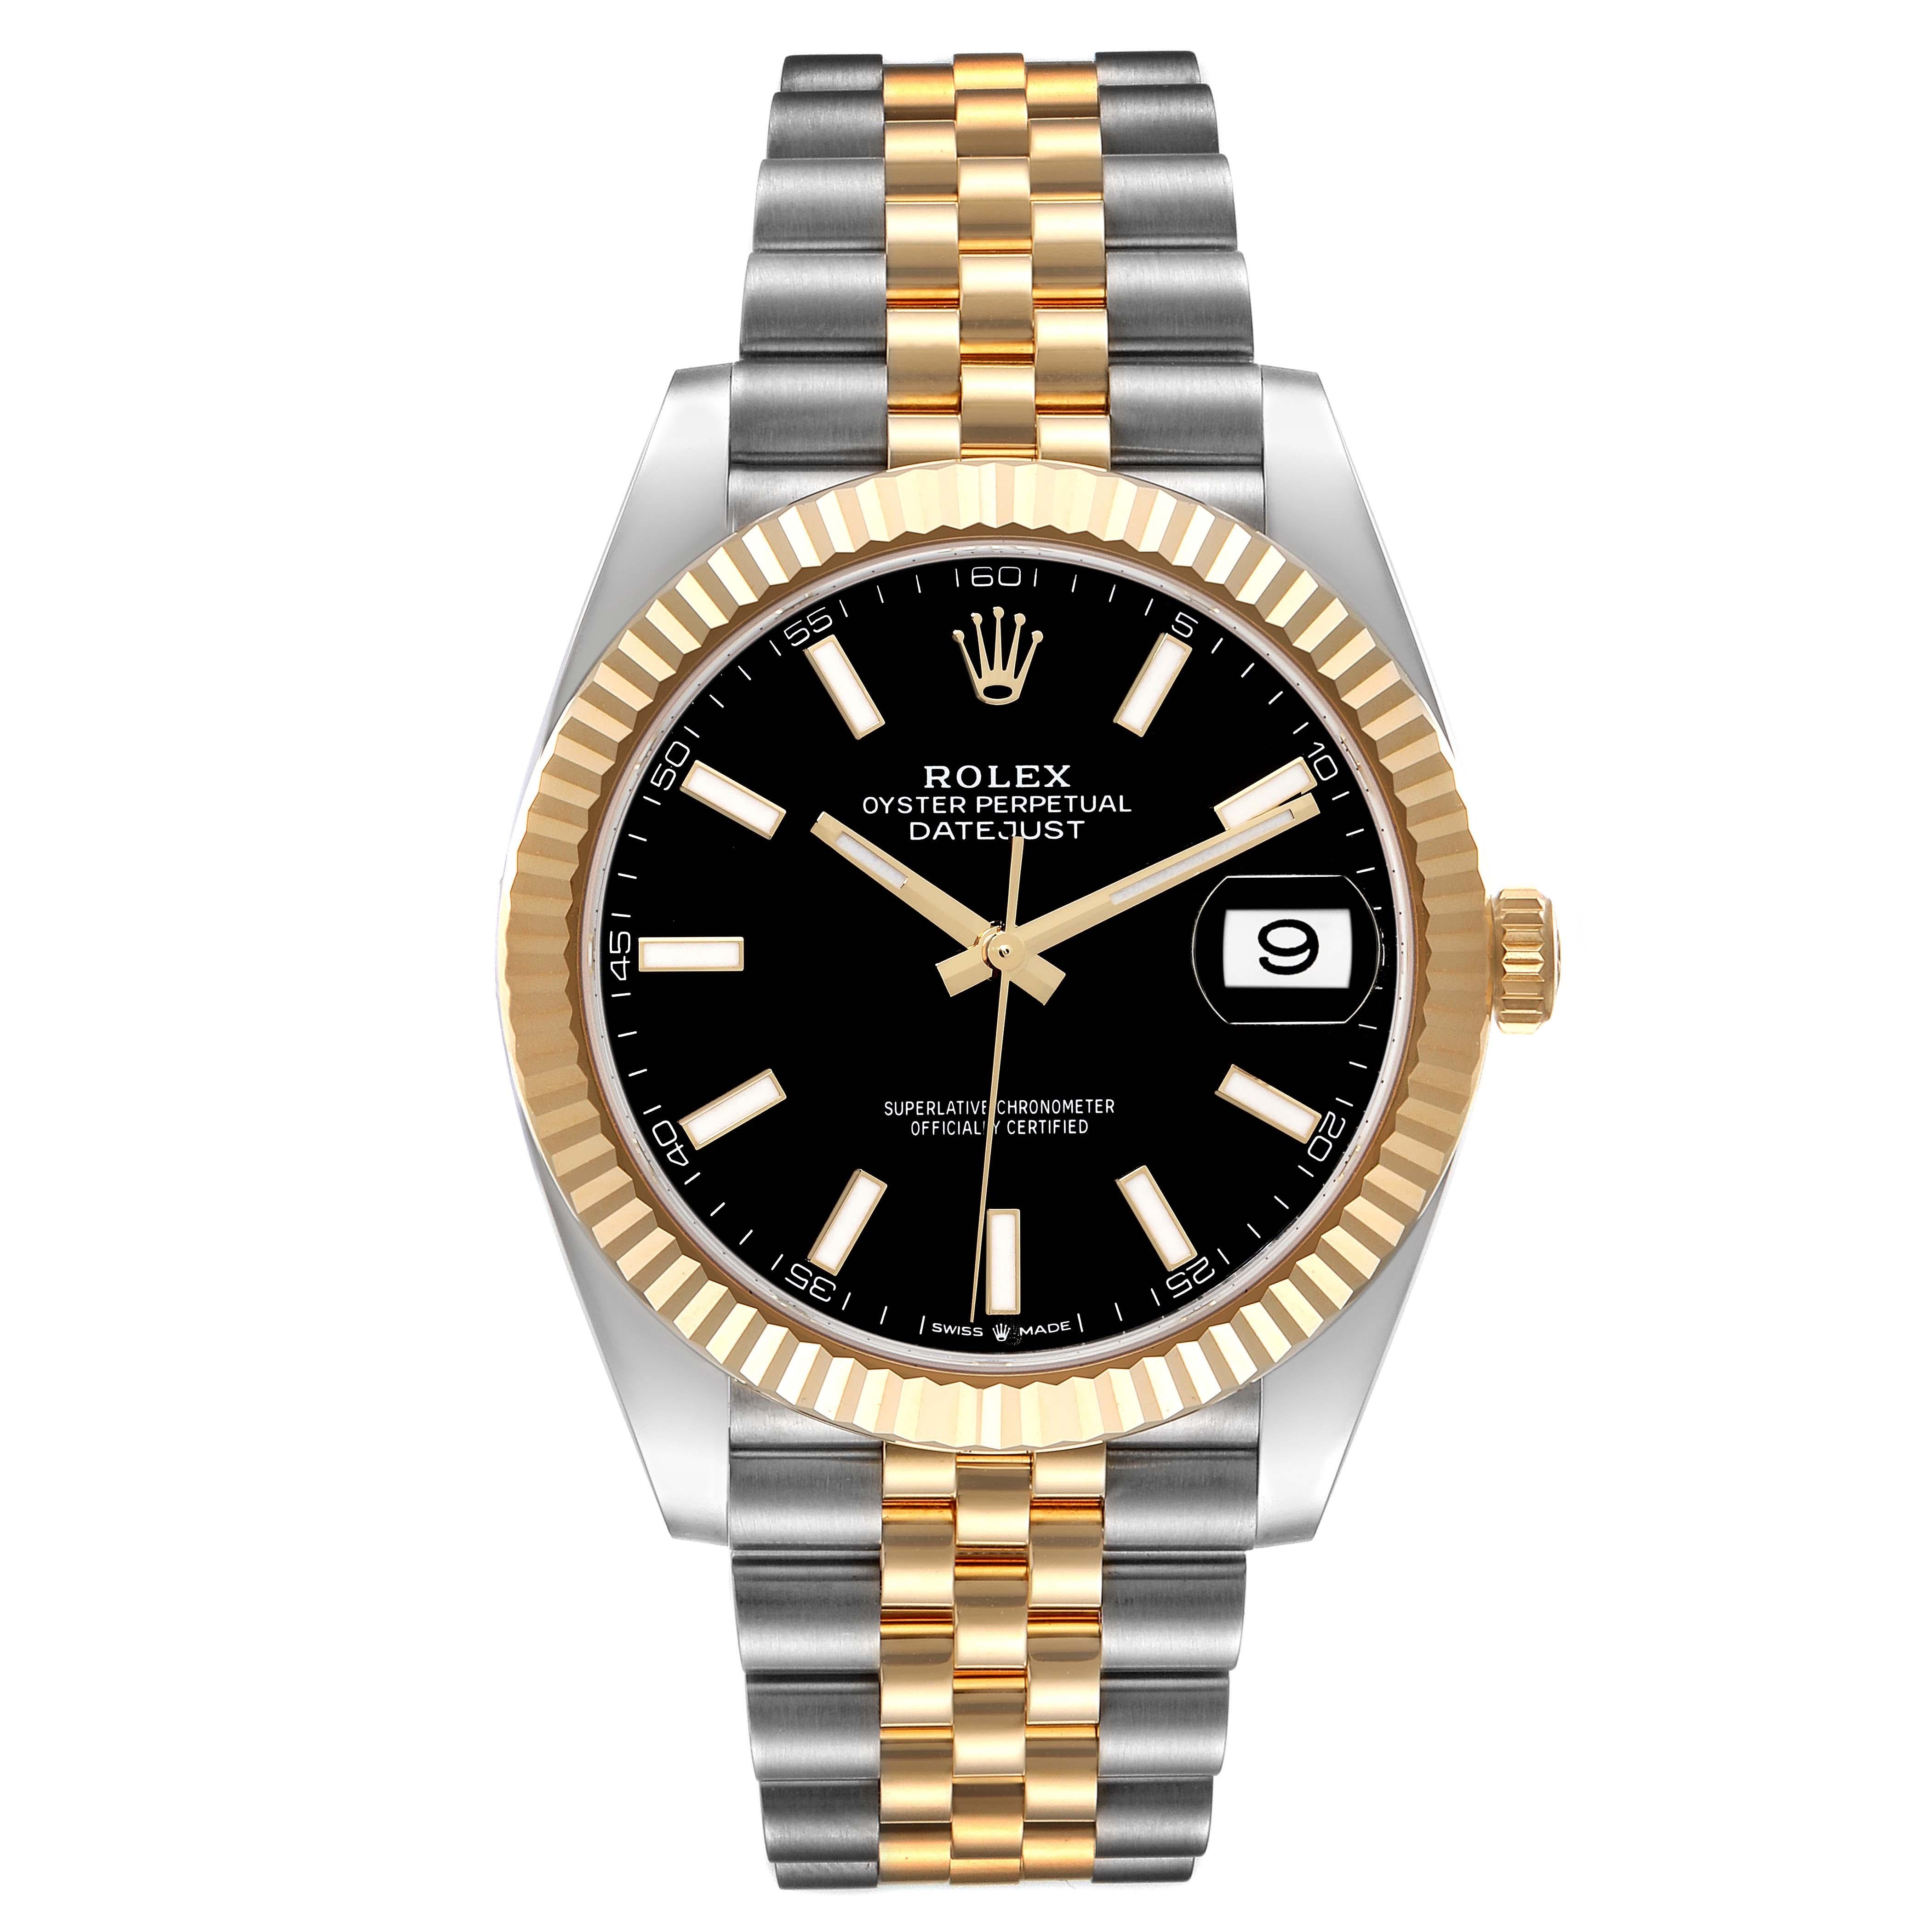 Rolex Datejust 41 Steel Yellow Gold Black Dial Mens Watch 126333 Box Card. Officially certified chronometer automatic self-winding movement. Stainless steel and 18K yellow gold case 41.0 mm in diameter. Rolex logo on the crown. 18K yellow gold